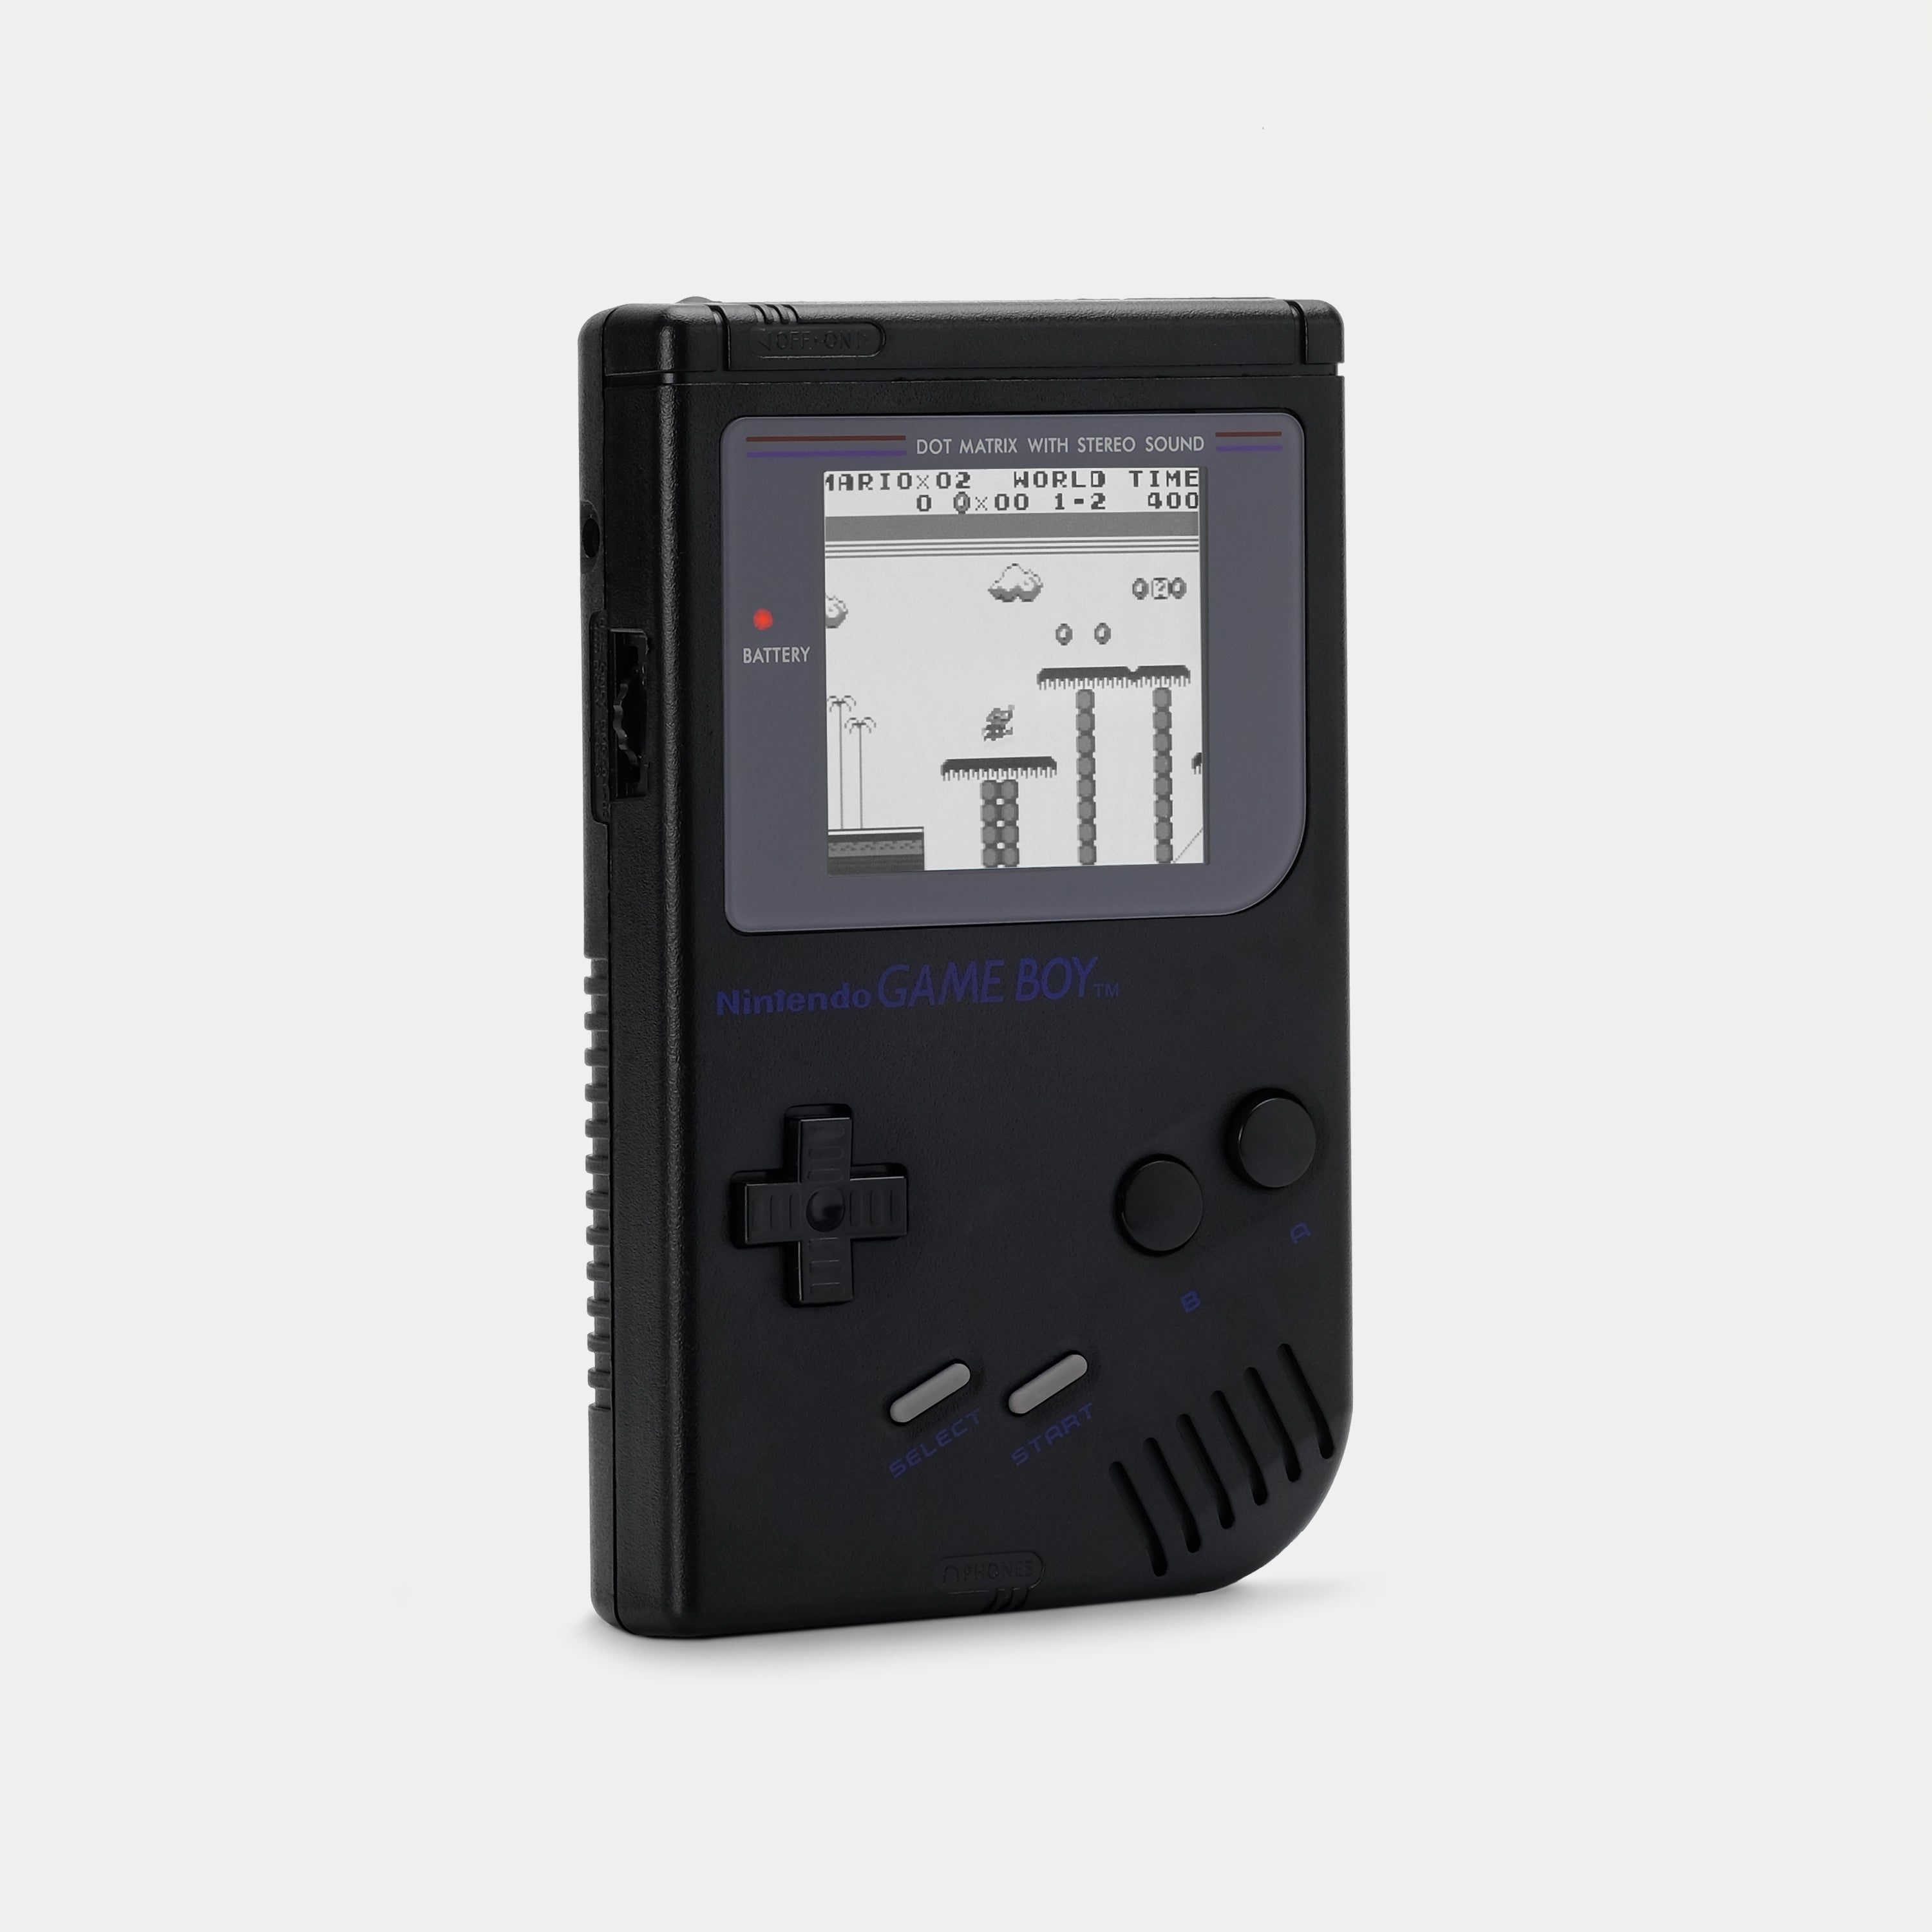 Nintendo Game Boy Black Game Console With Multicolor Backlight